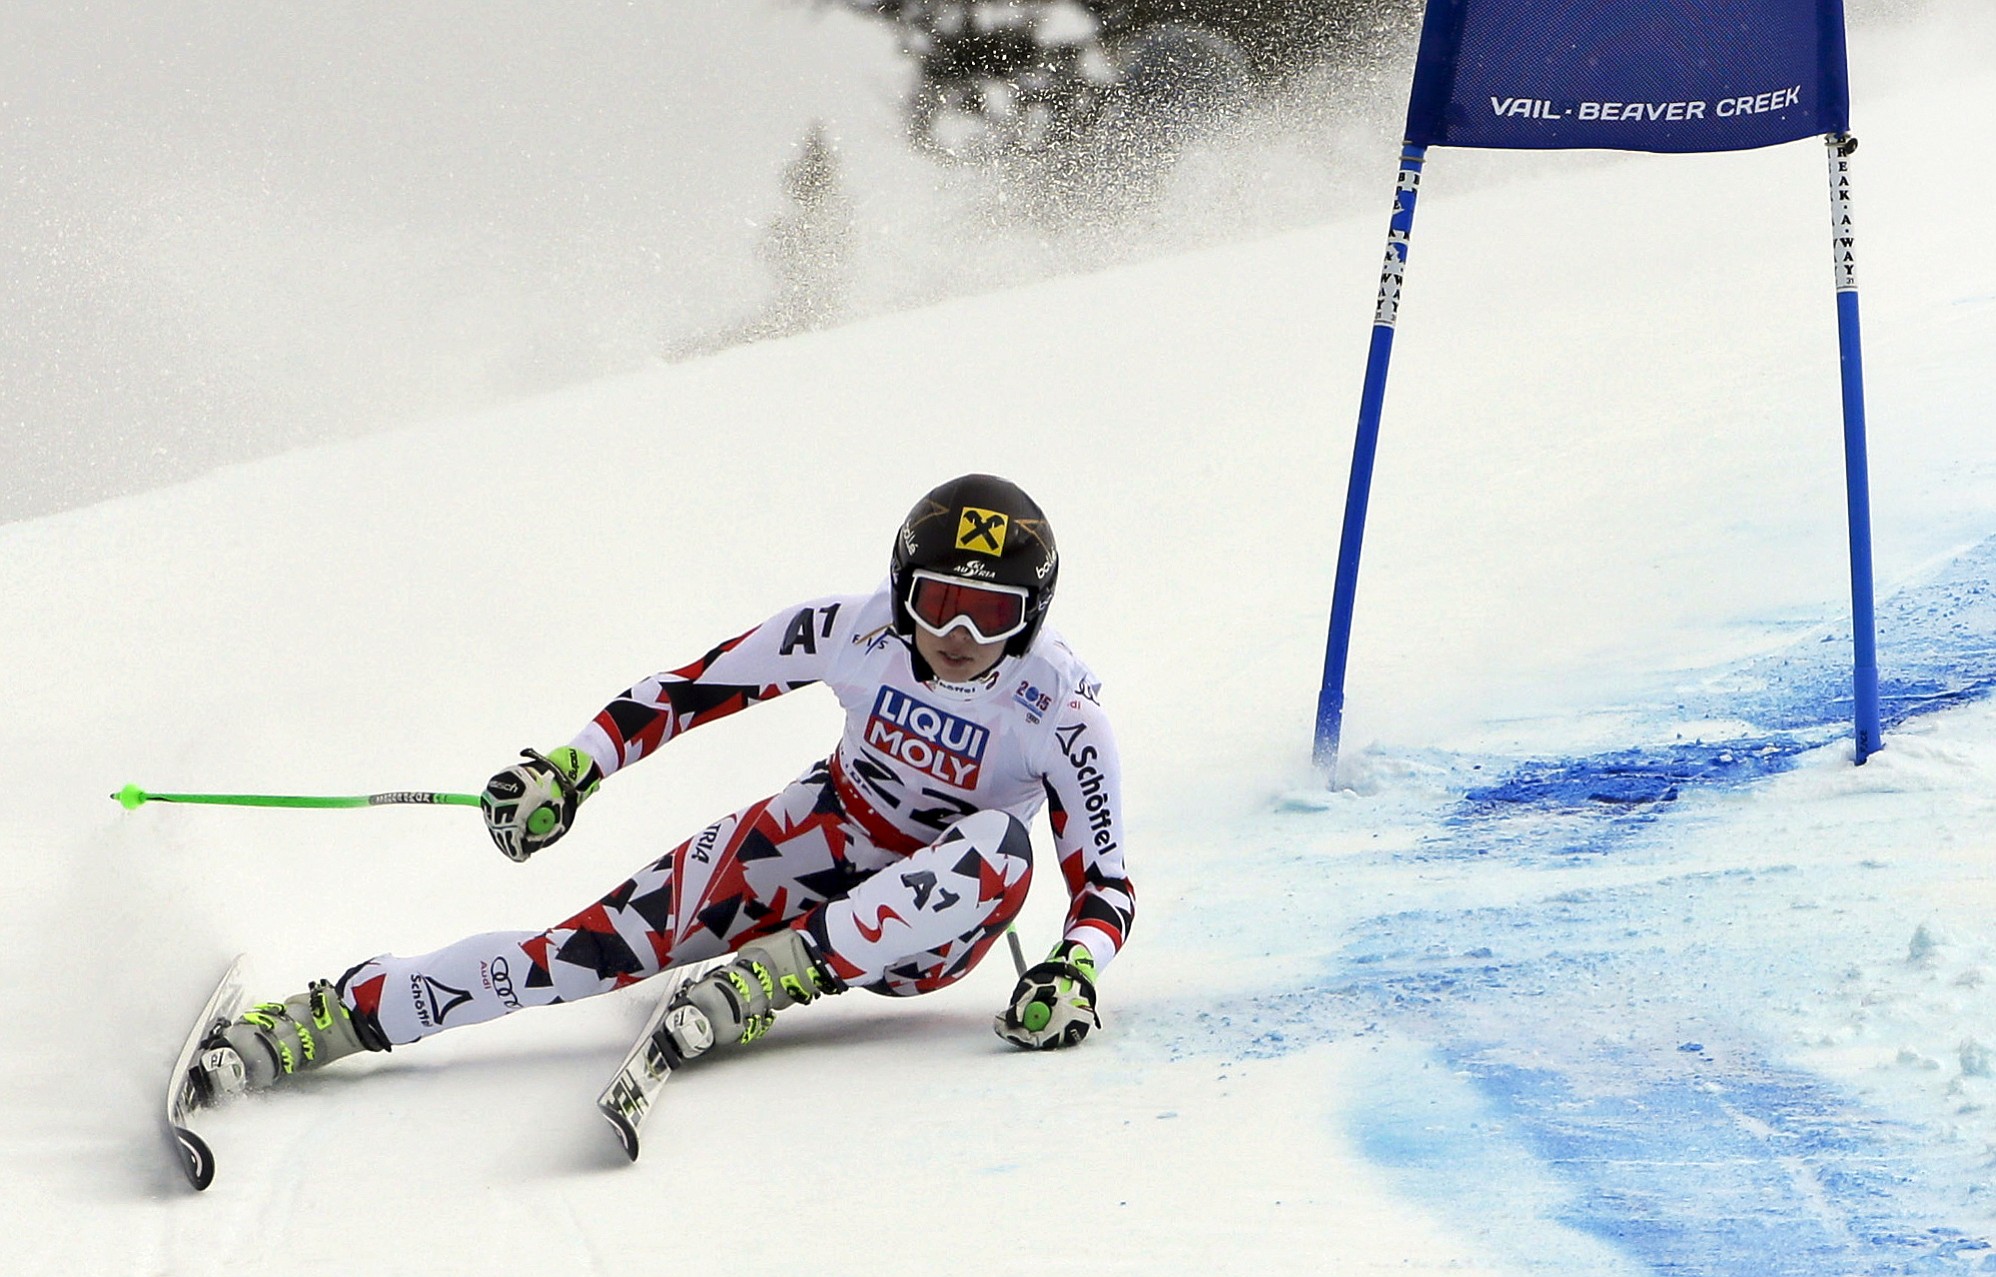 Austria's Anna Fenninger races down the course during the women's super-G competition at the alpine skiing world championships on Tuesday, Feb. 3, 2015, in Beaver Creek, Colo.